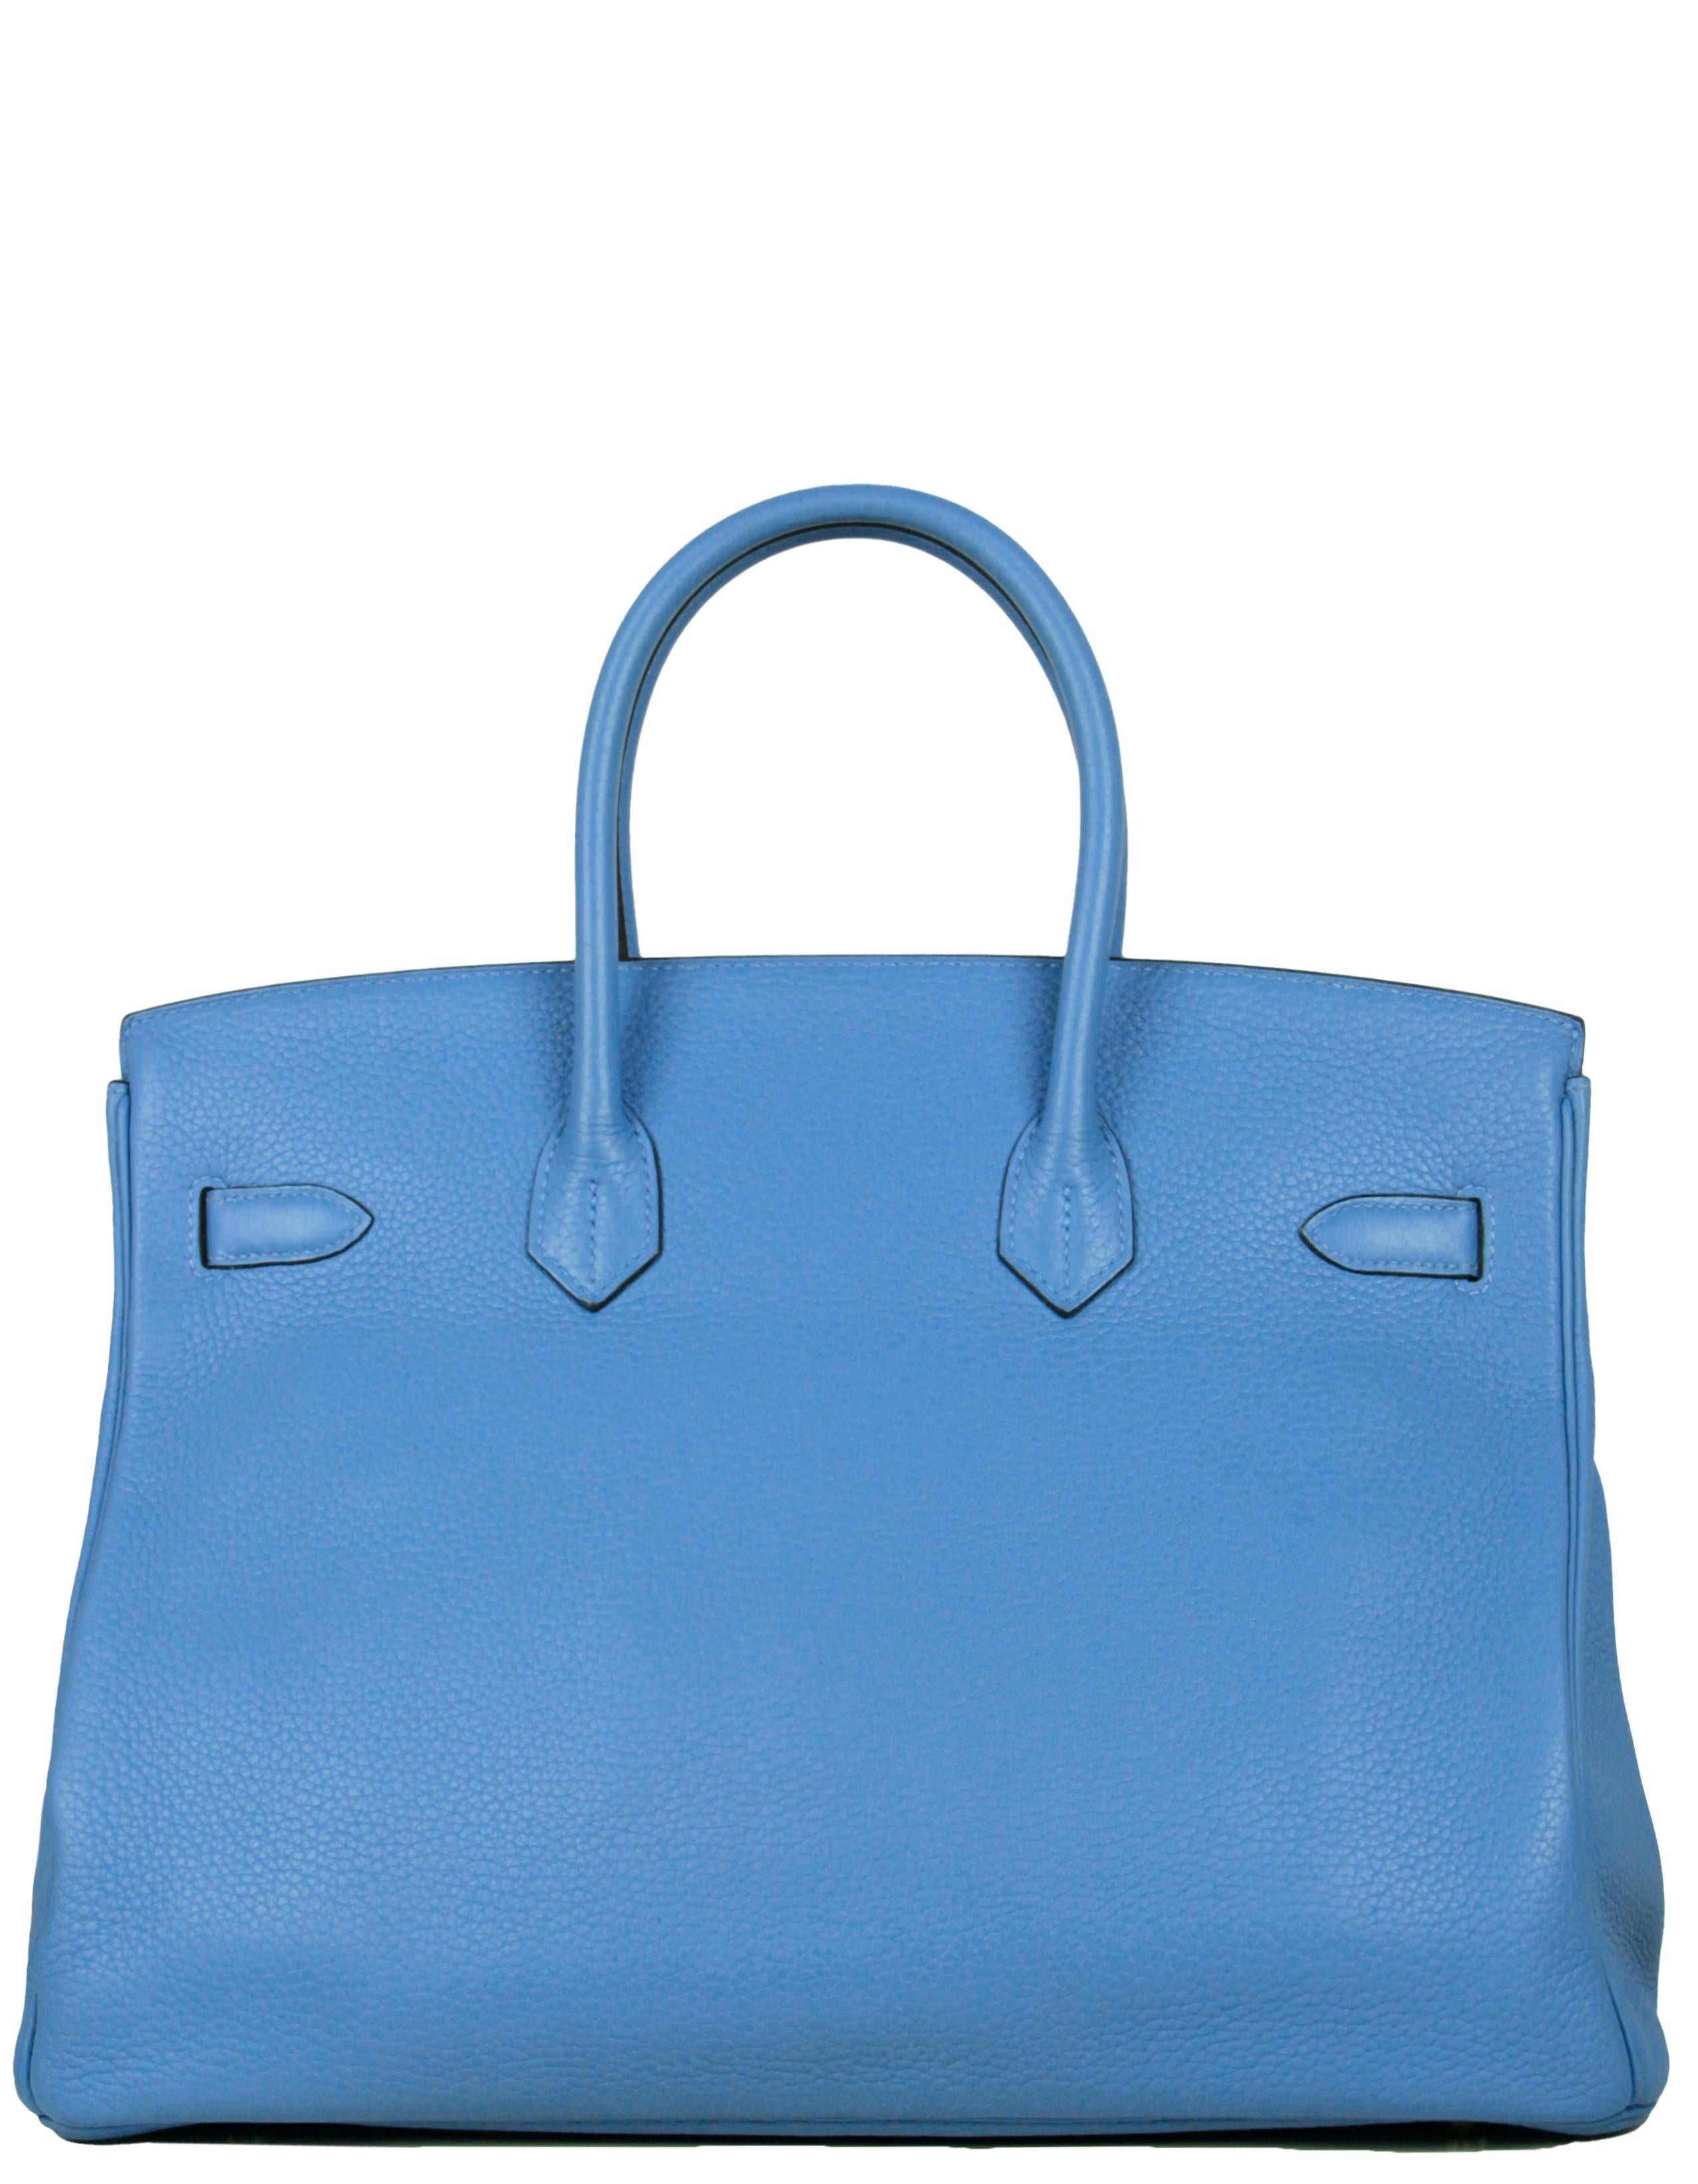 Hermes Blue Paradis Taurillon Clemence Leather 35cm Birkin Bag GHW In Excellent Condition For Sale In New York, NY